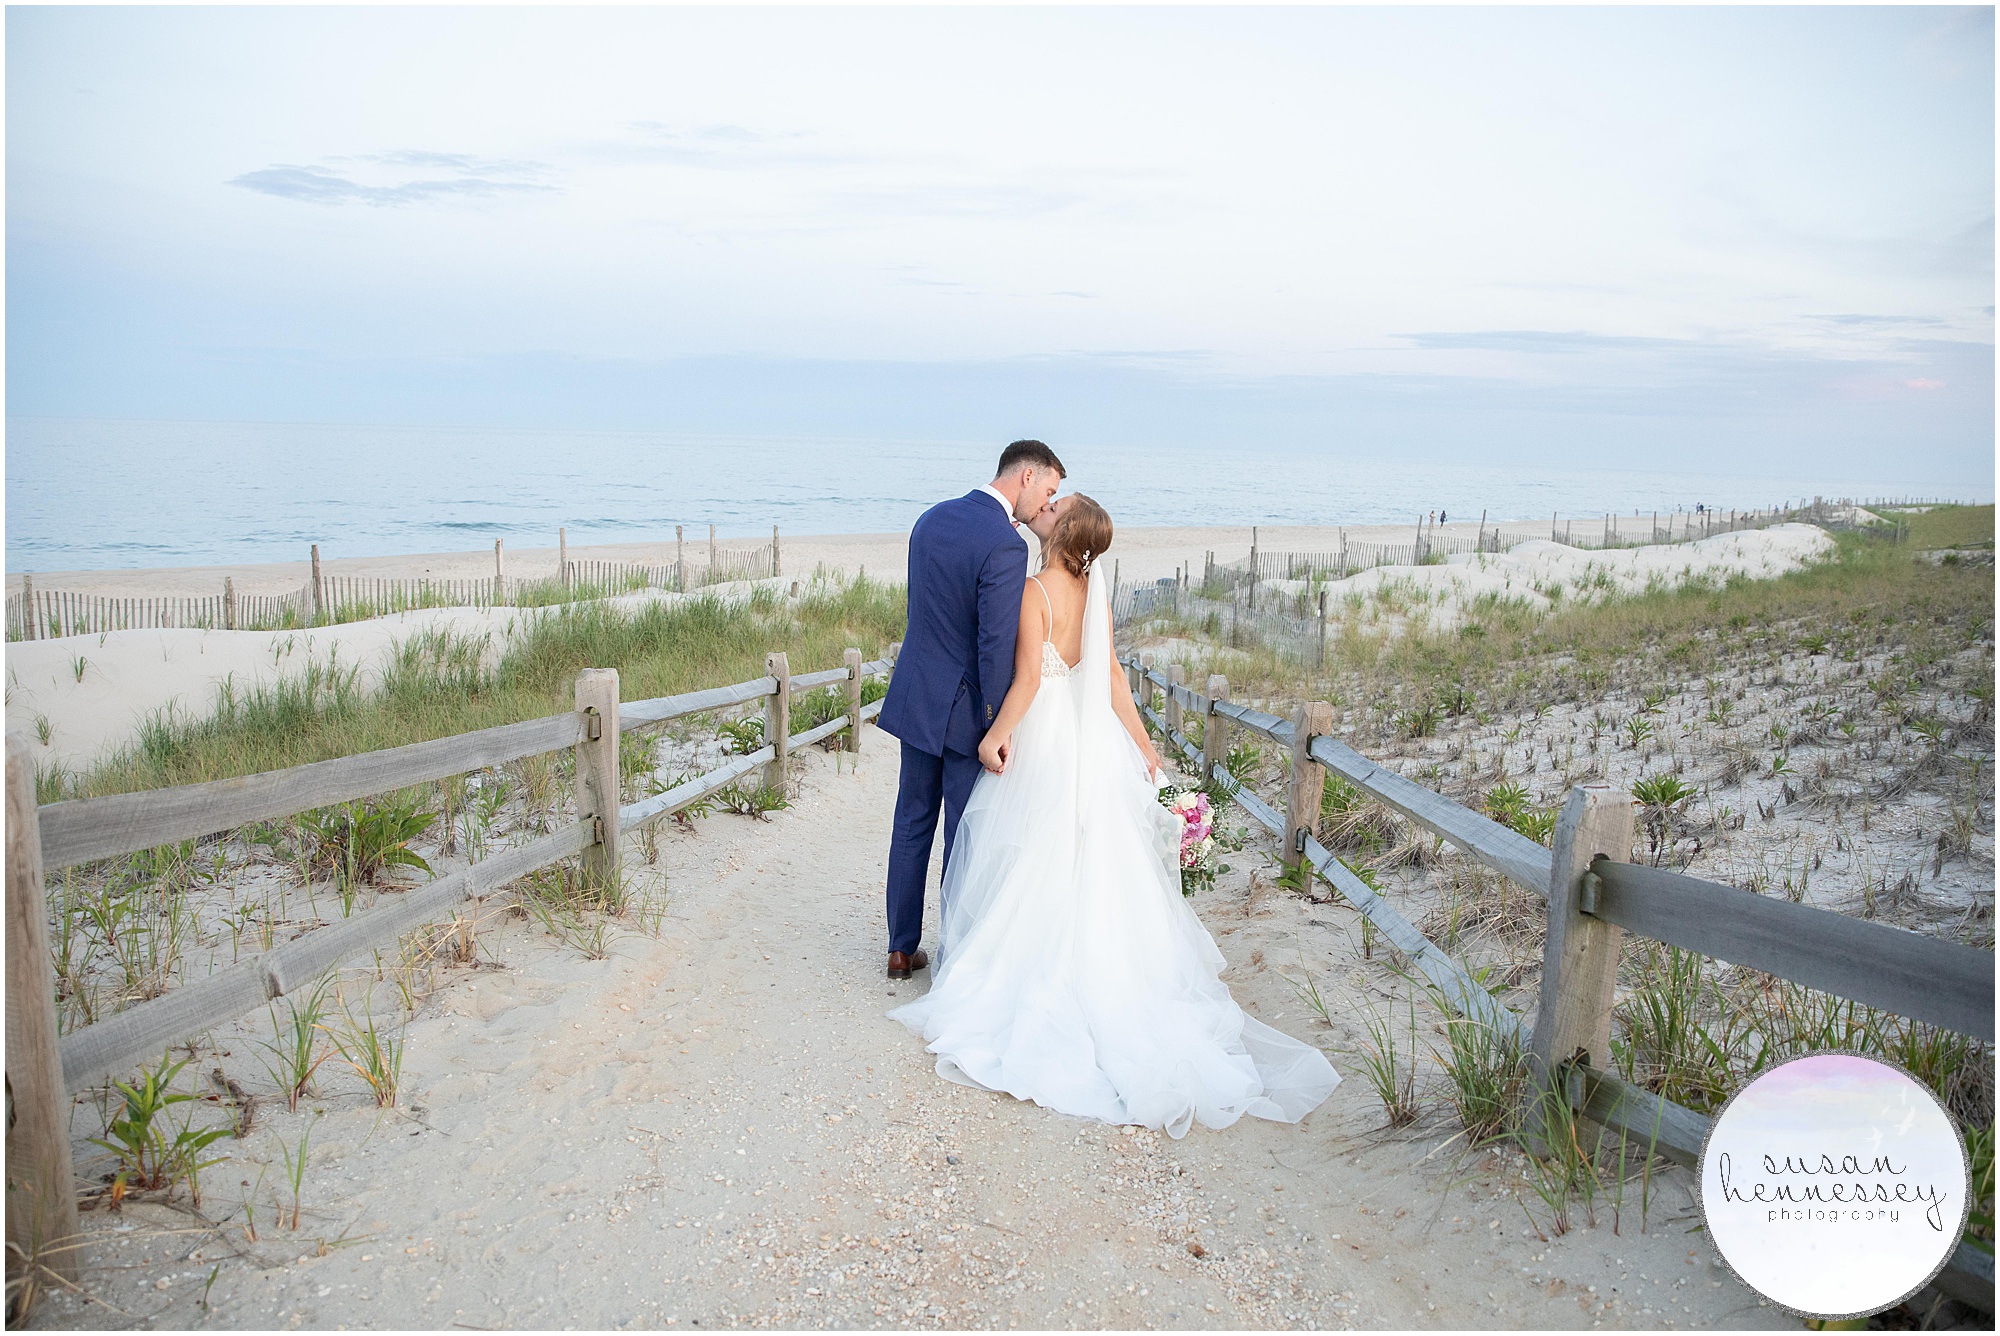 Nicole and Evan were married in LBI